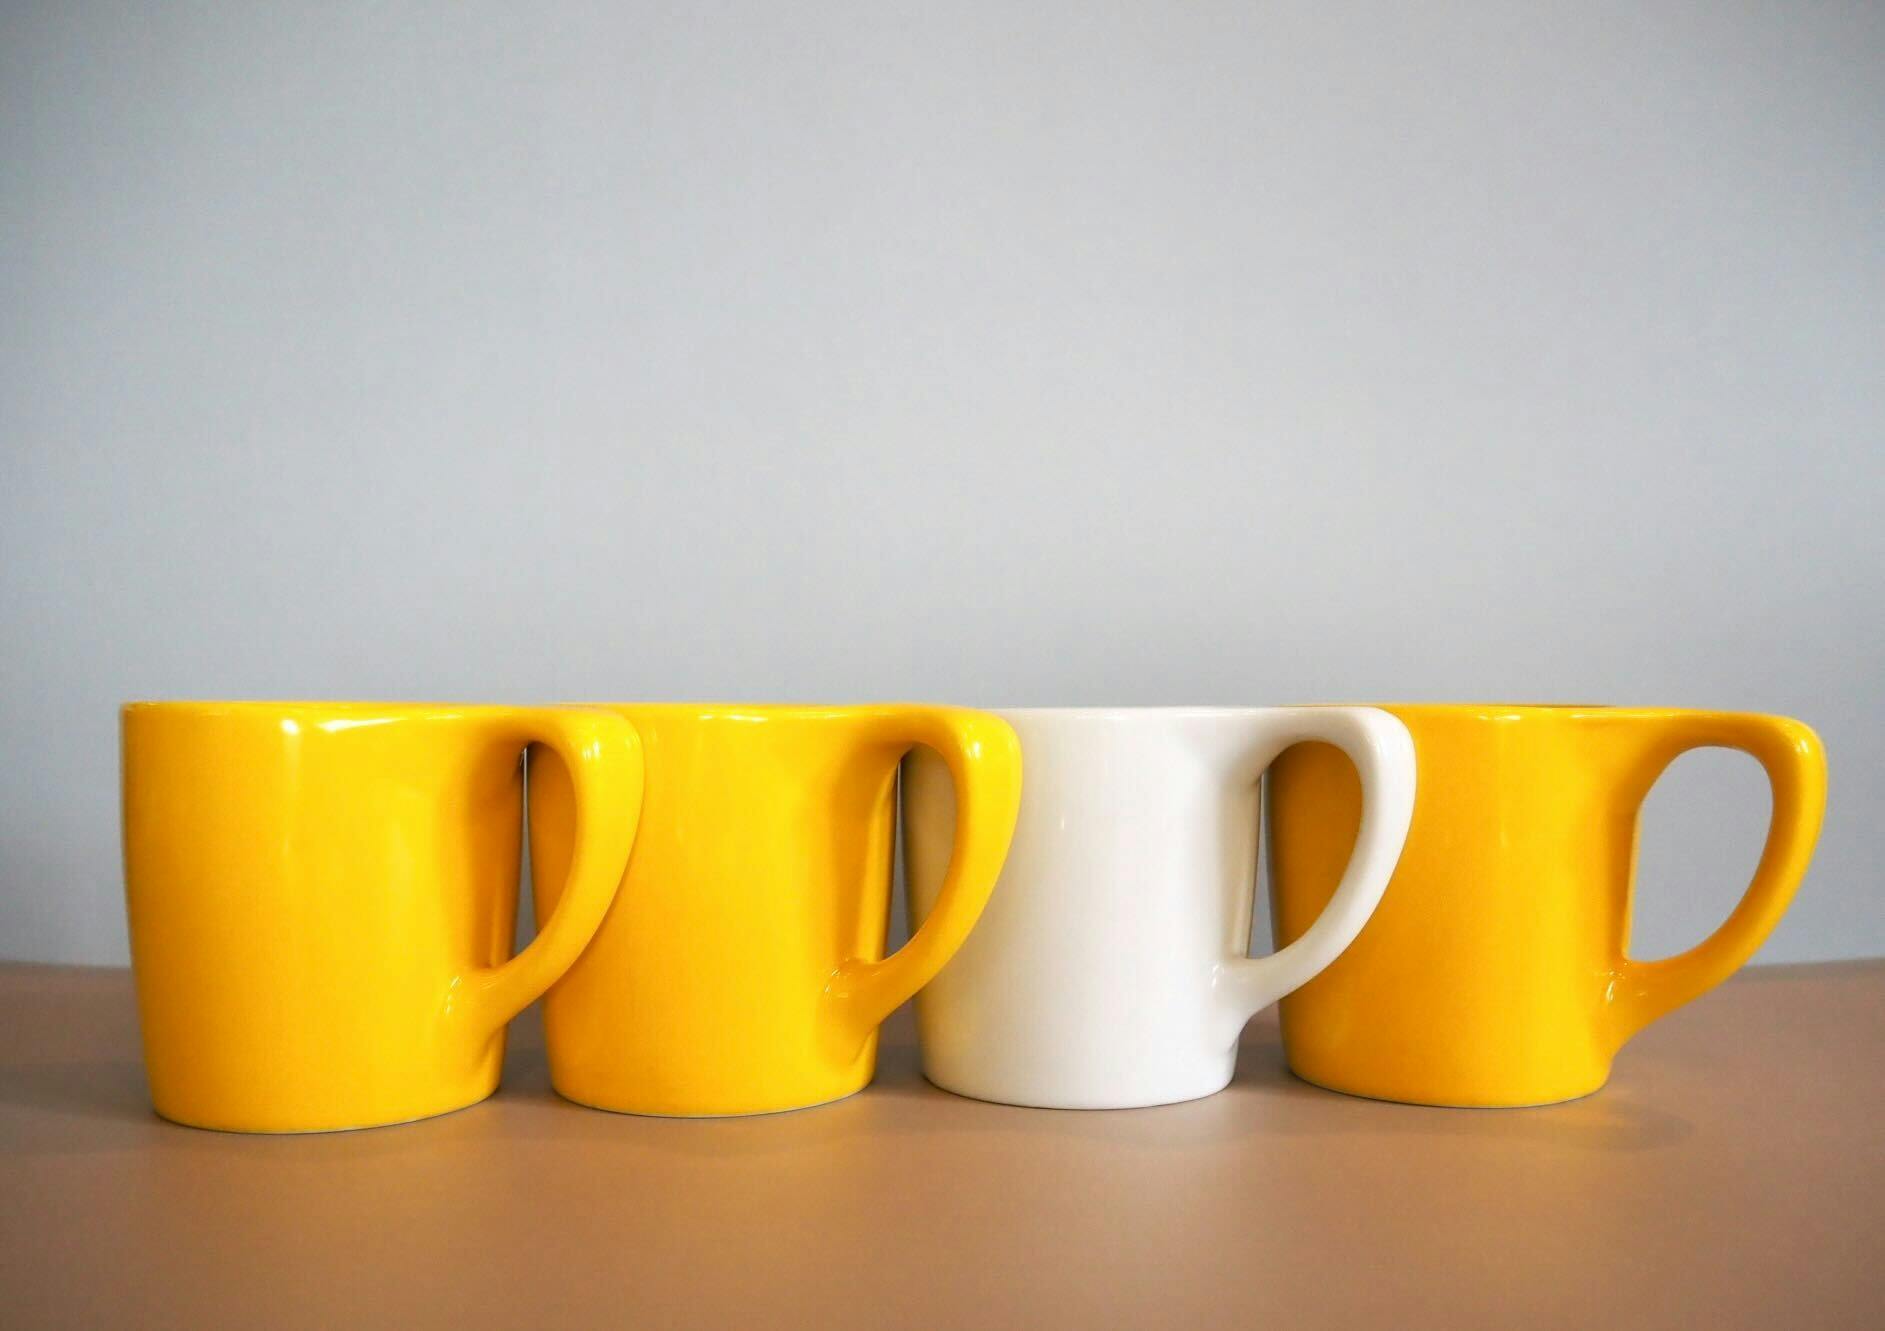 Four mugs neatly lined up. Three mugs are bright yellow while one in the middle right is white.